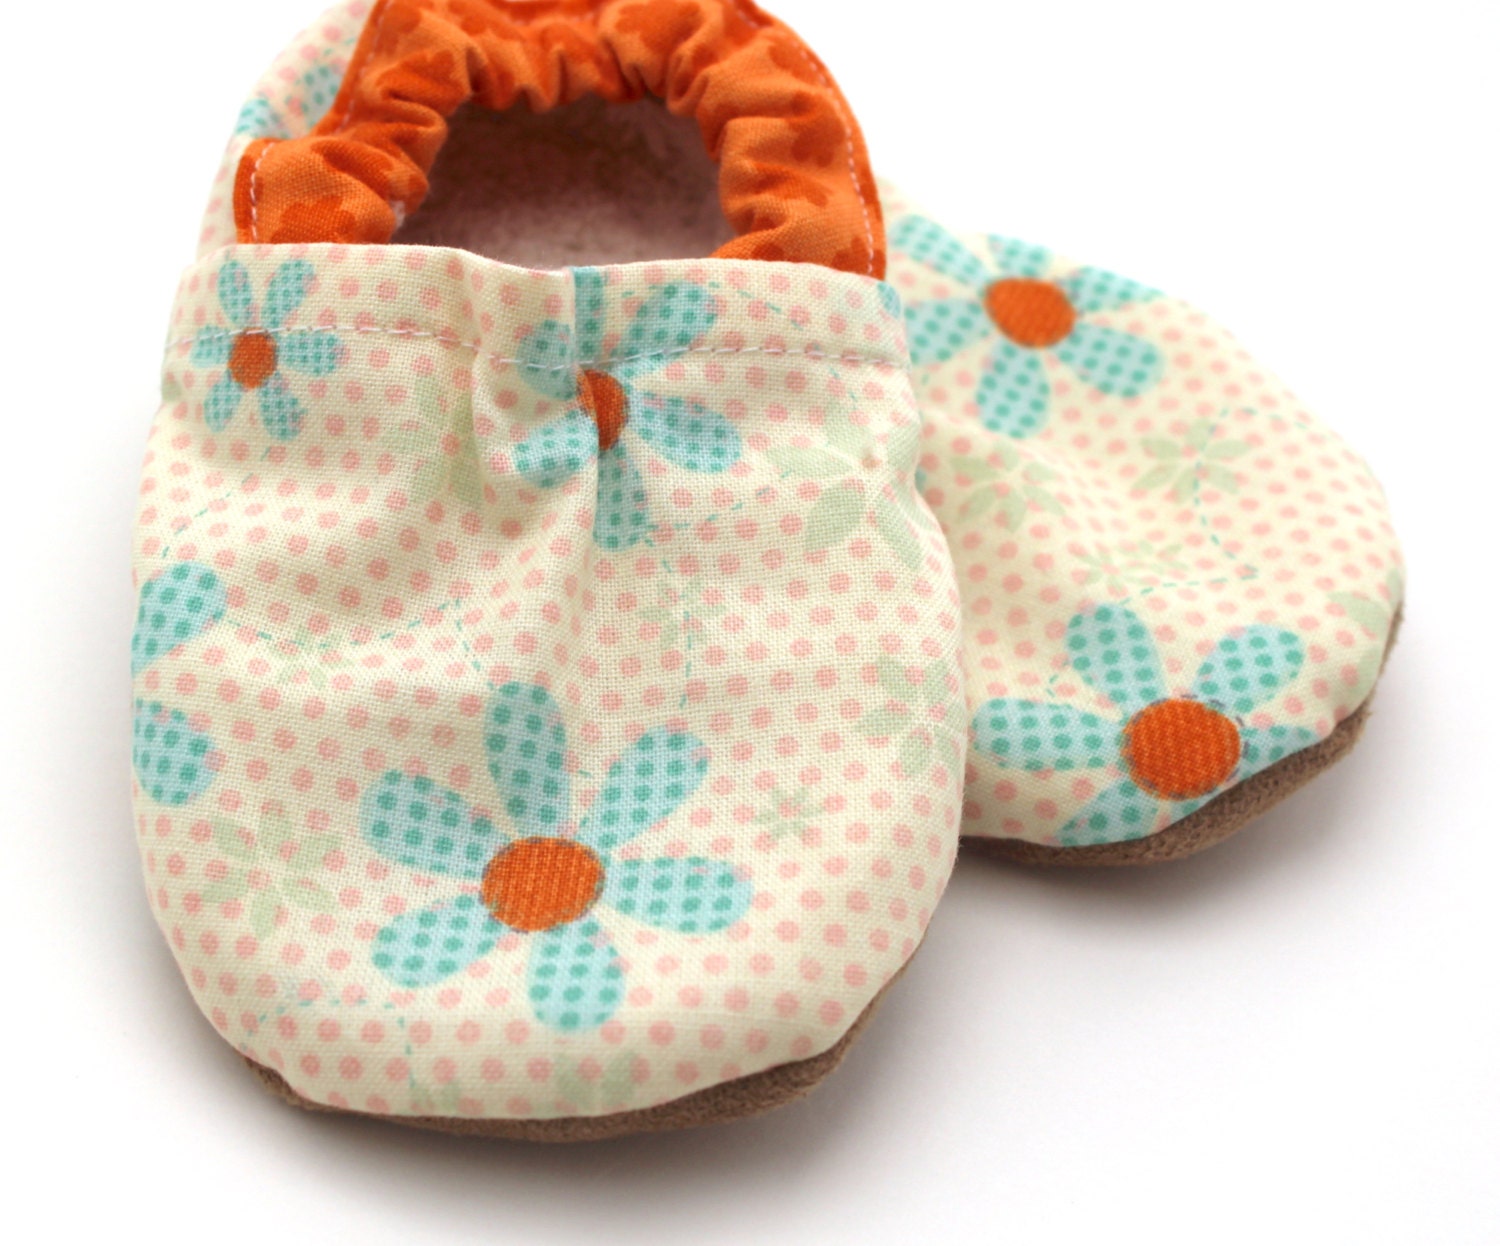 flower baby shoes orange and blue flower shoes for baby soft